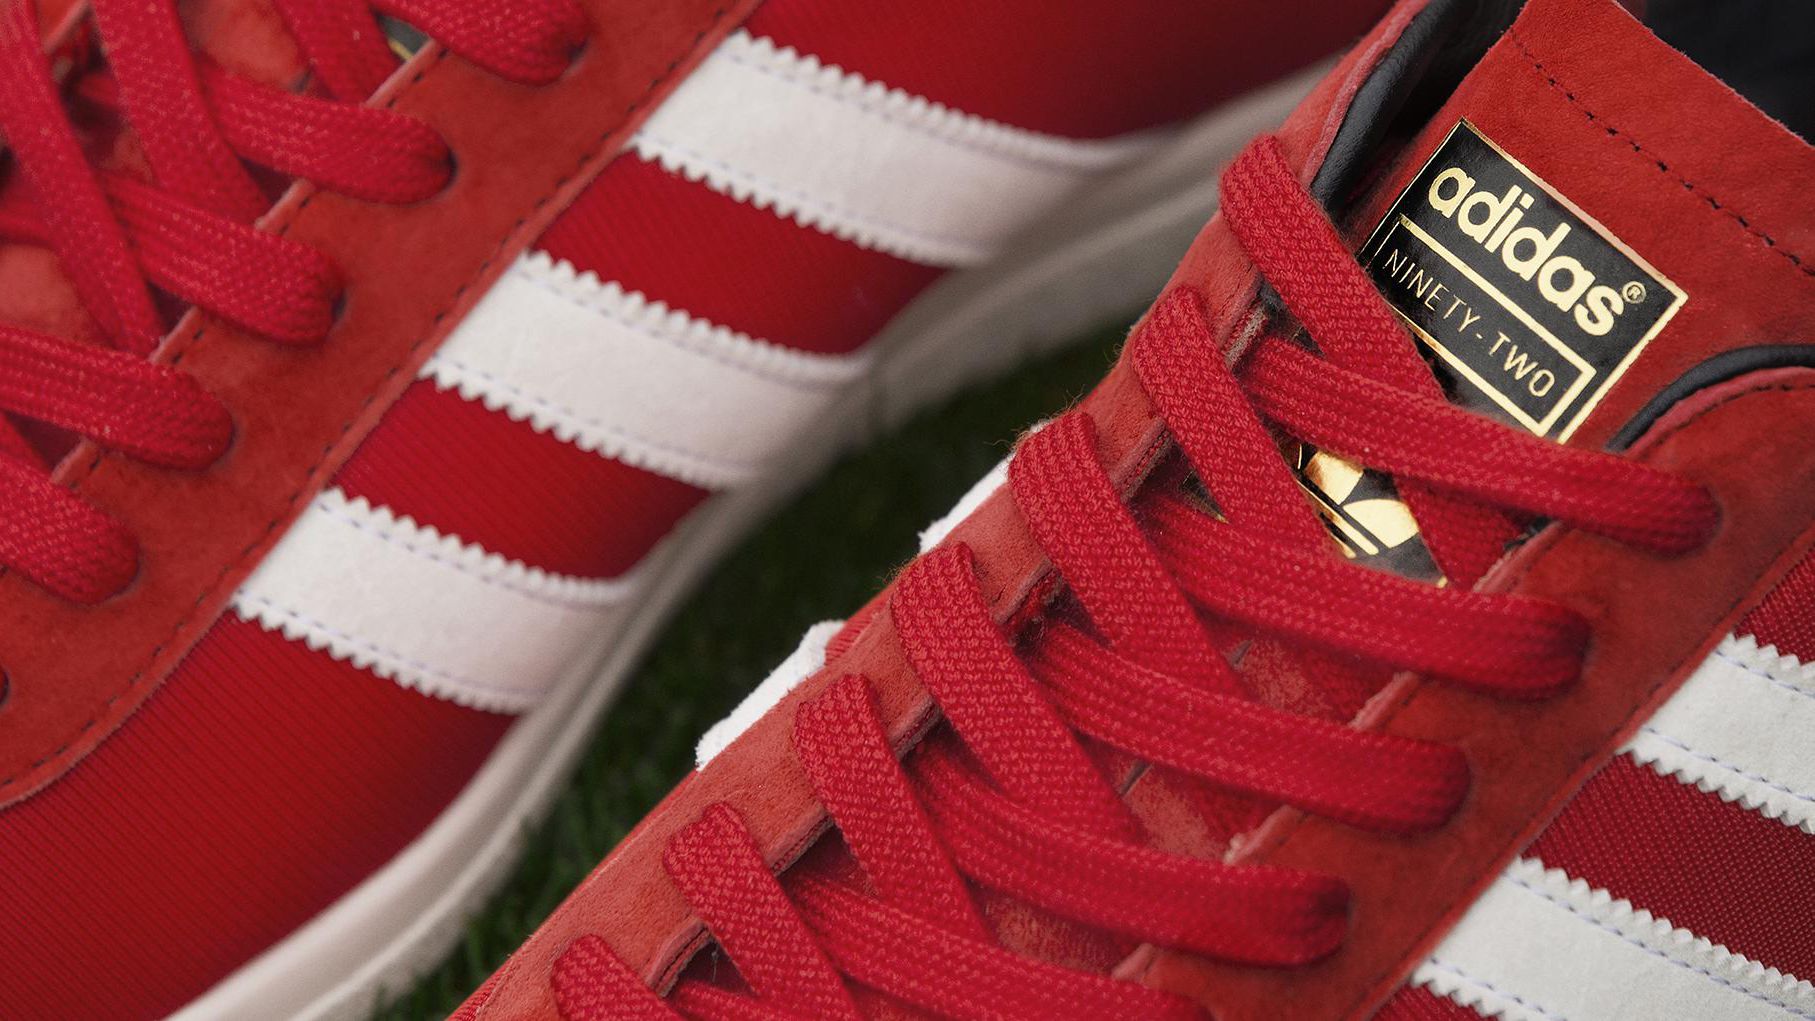 Gallery of adidas Class of 92 trainers | Manchester United